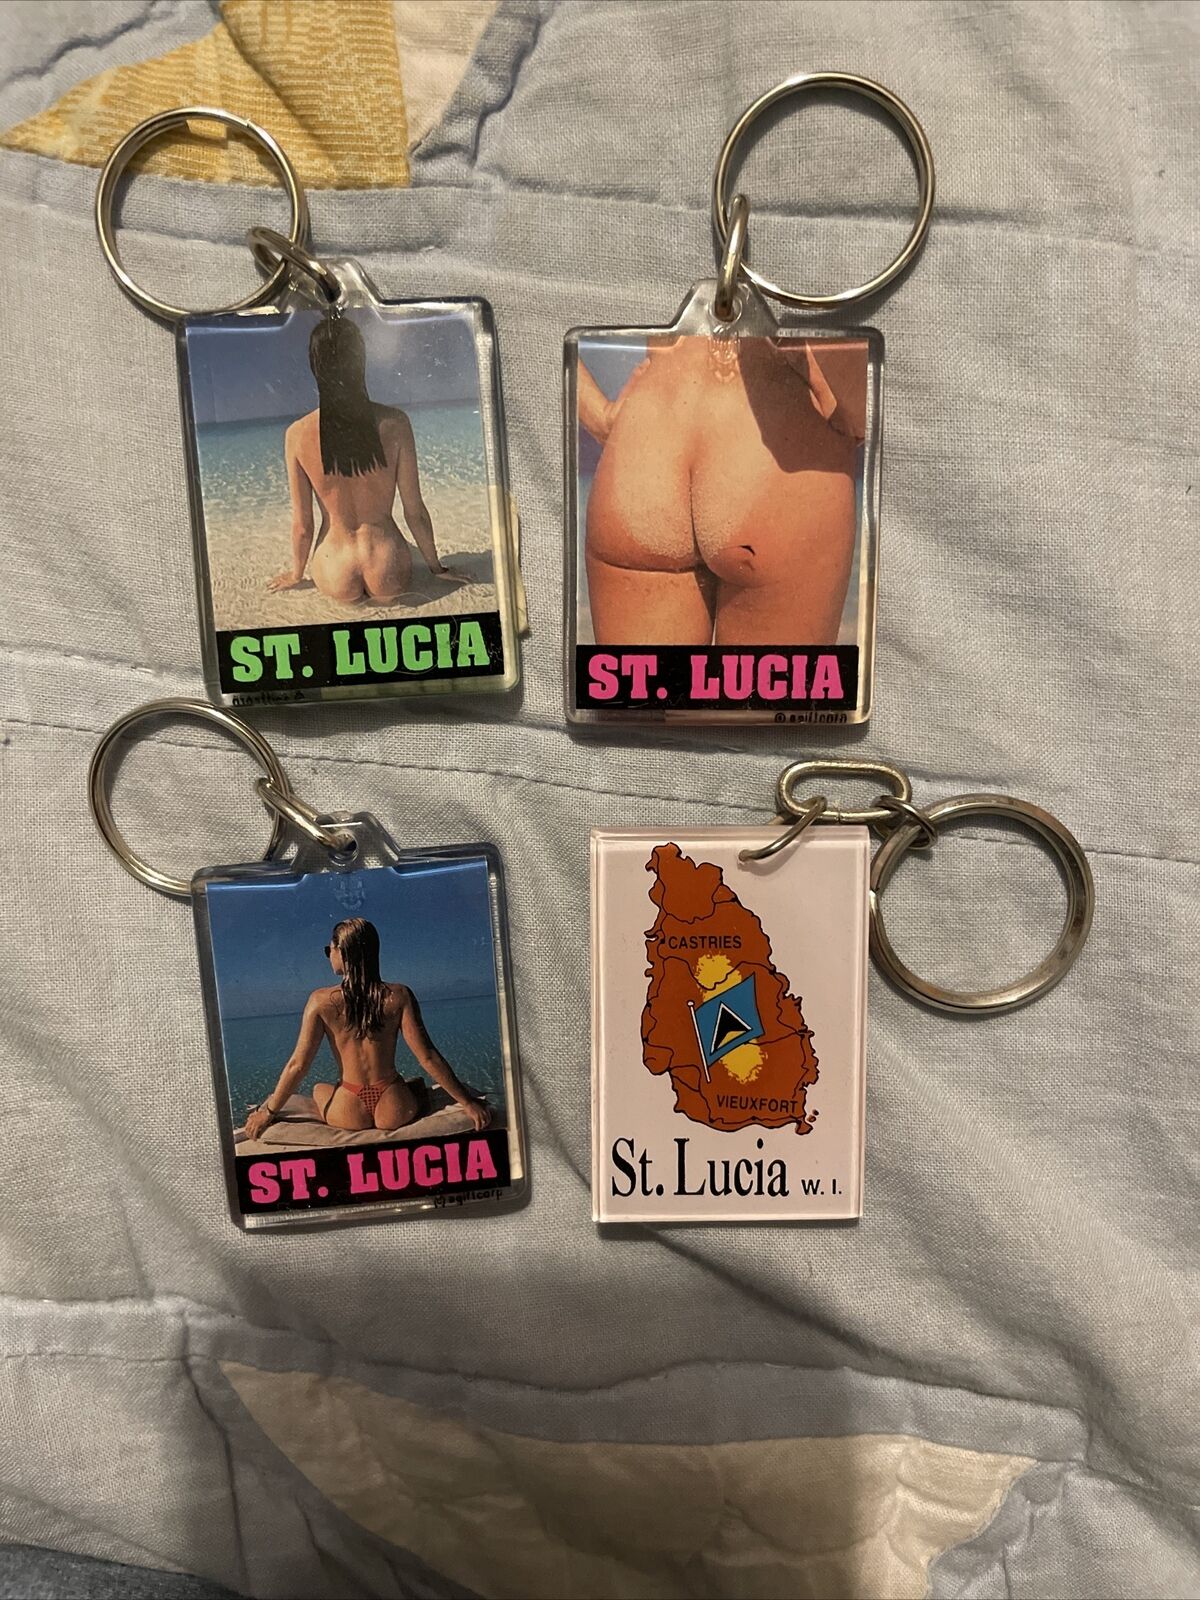 St. Lucia 4 key chains - Bare Bottoms And Island With Flag